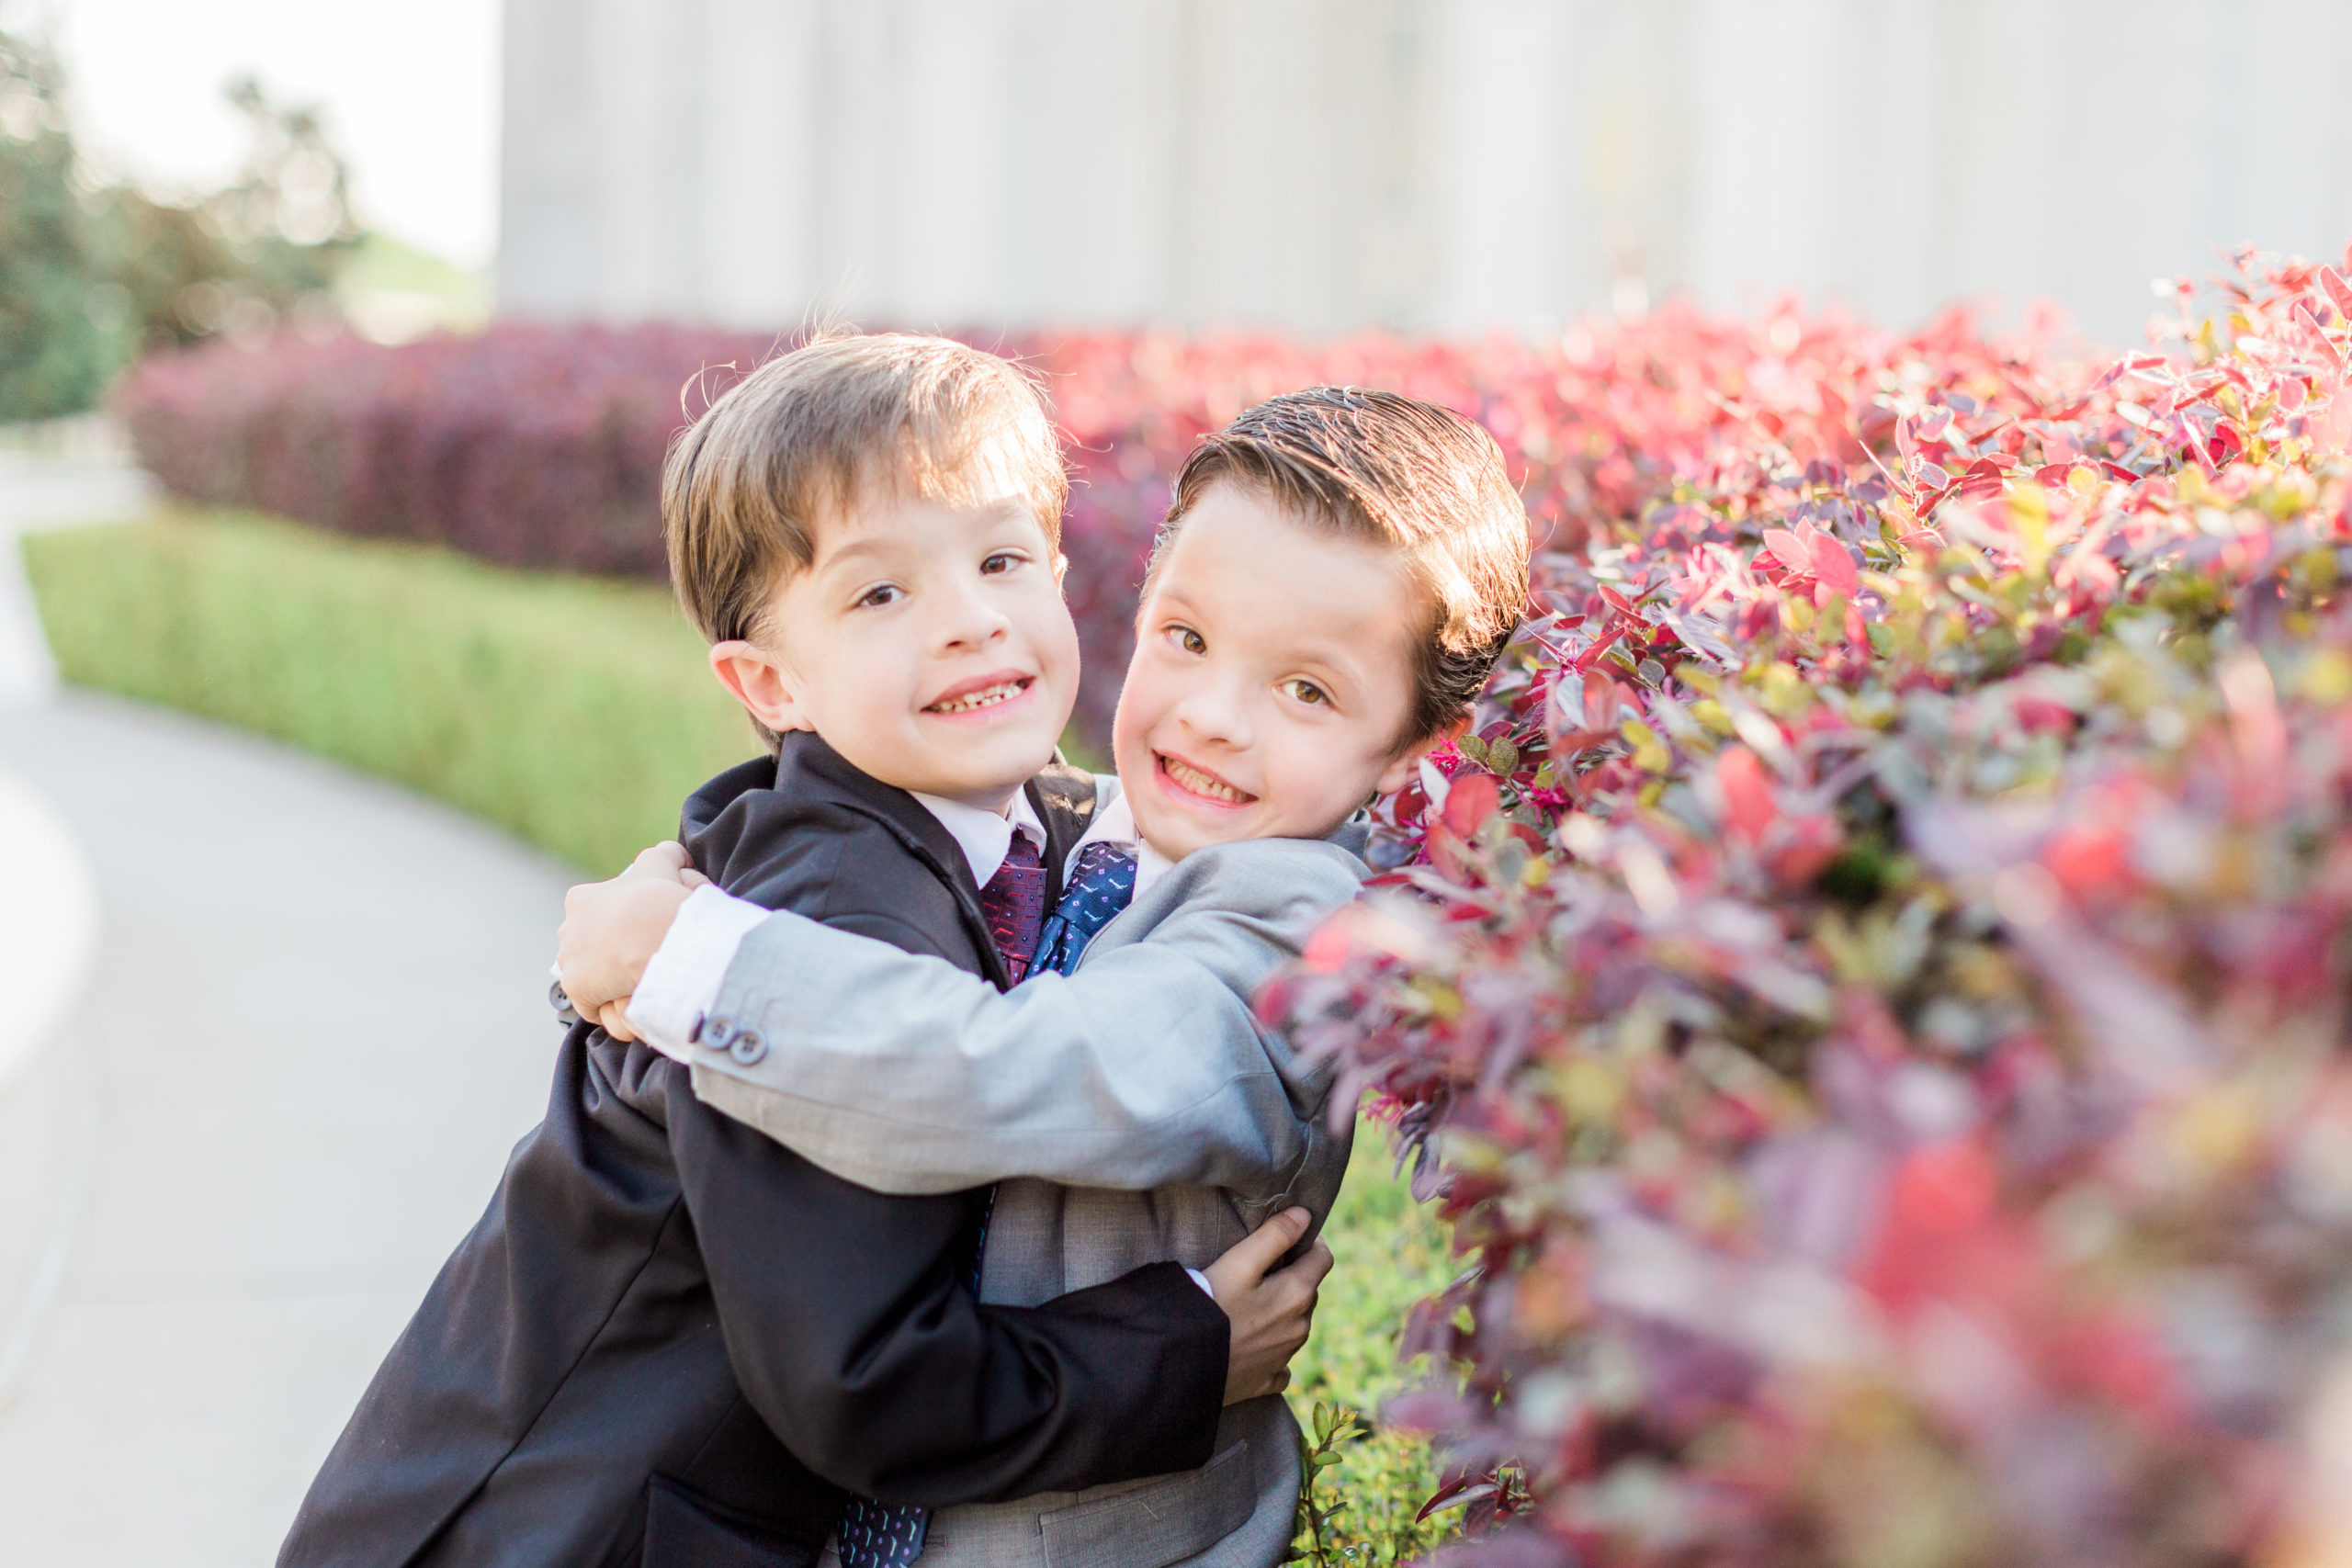 Two brothers wrap their arms around each other and smile for the camera